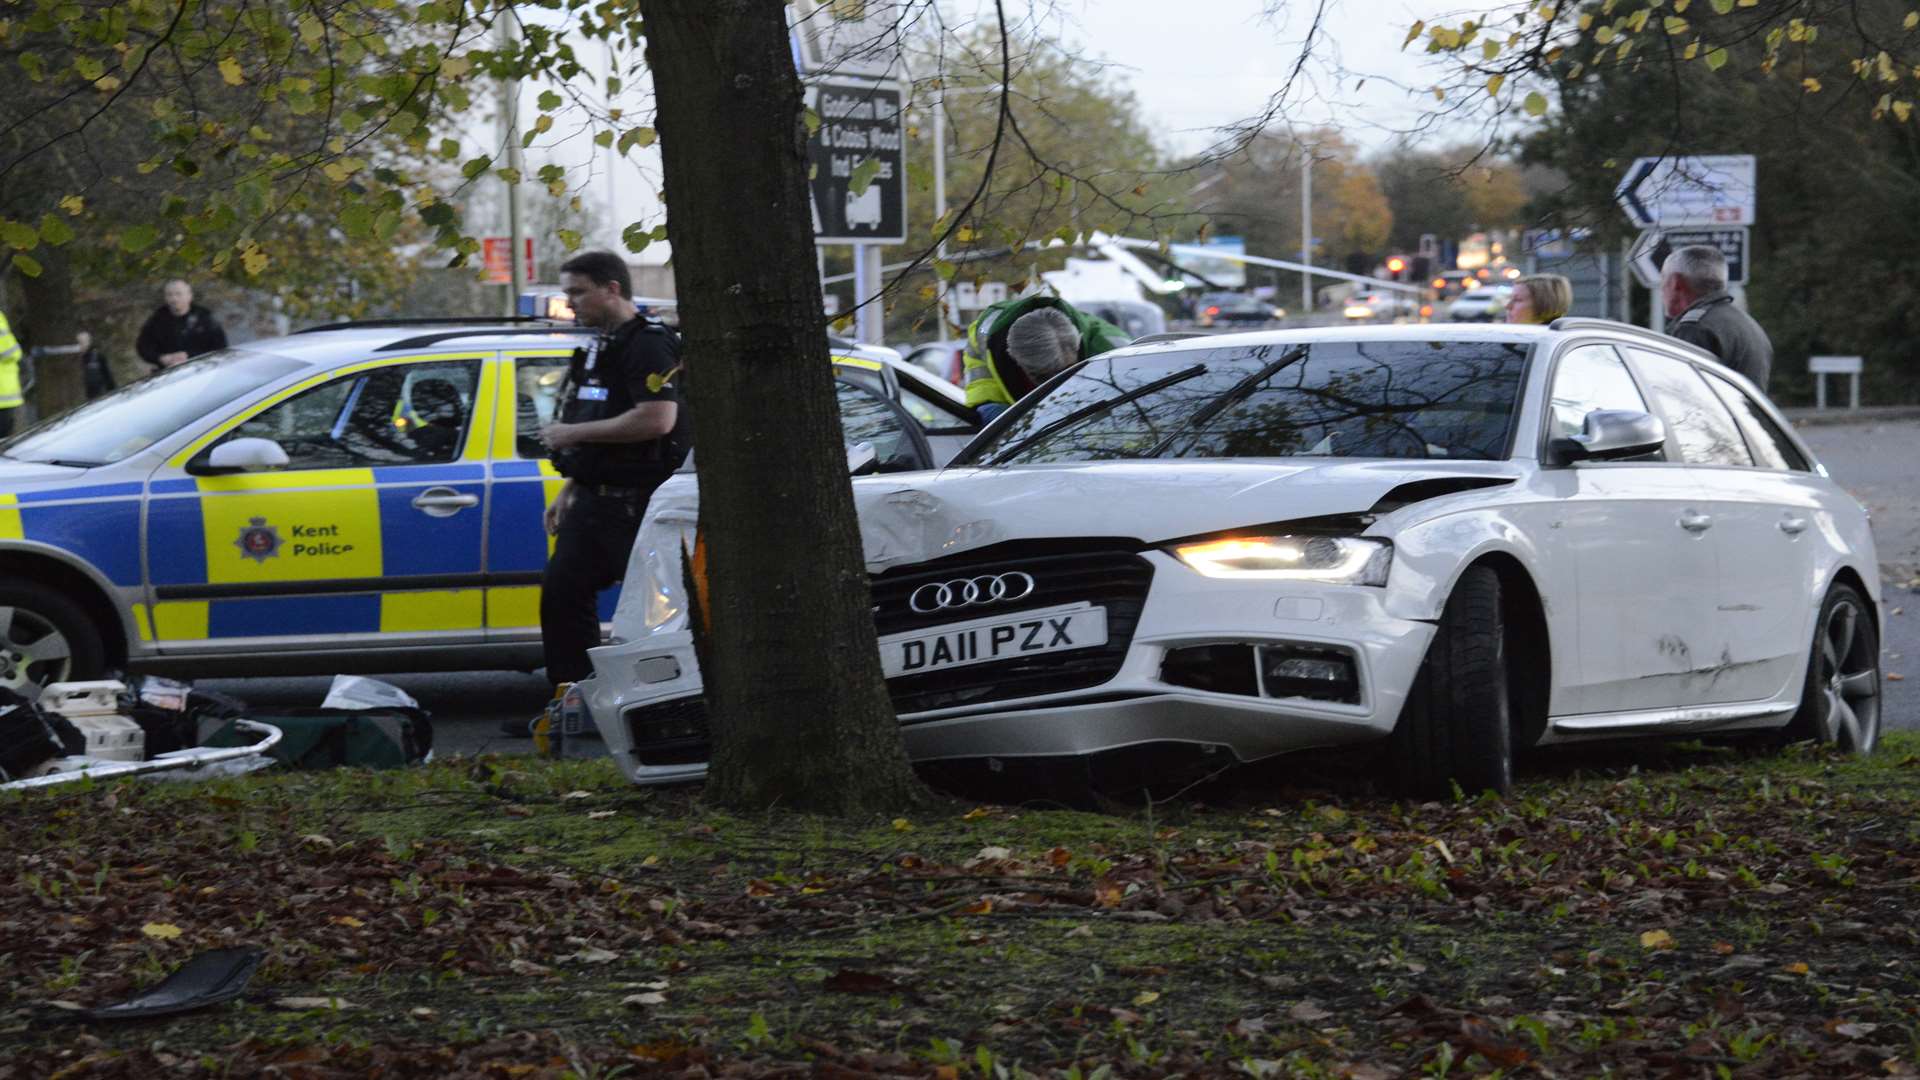 An Audi crashed into a tree near the Matalan roundabout. Picture: Paul Amos